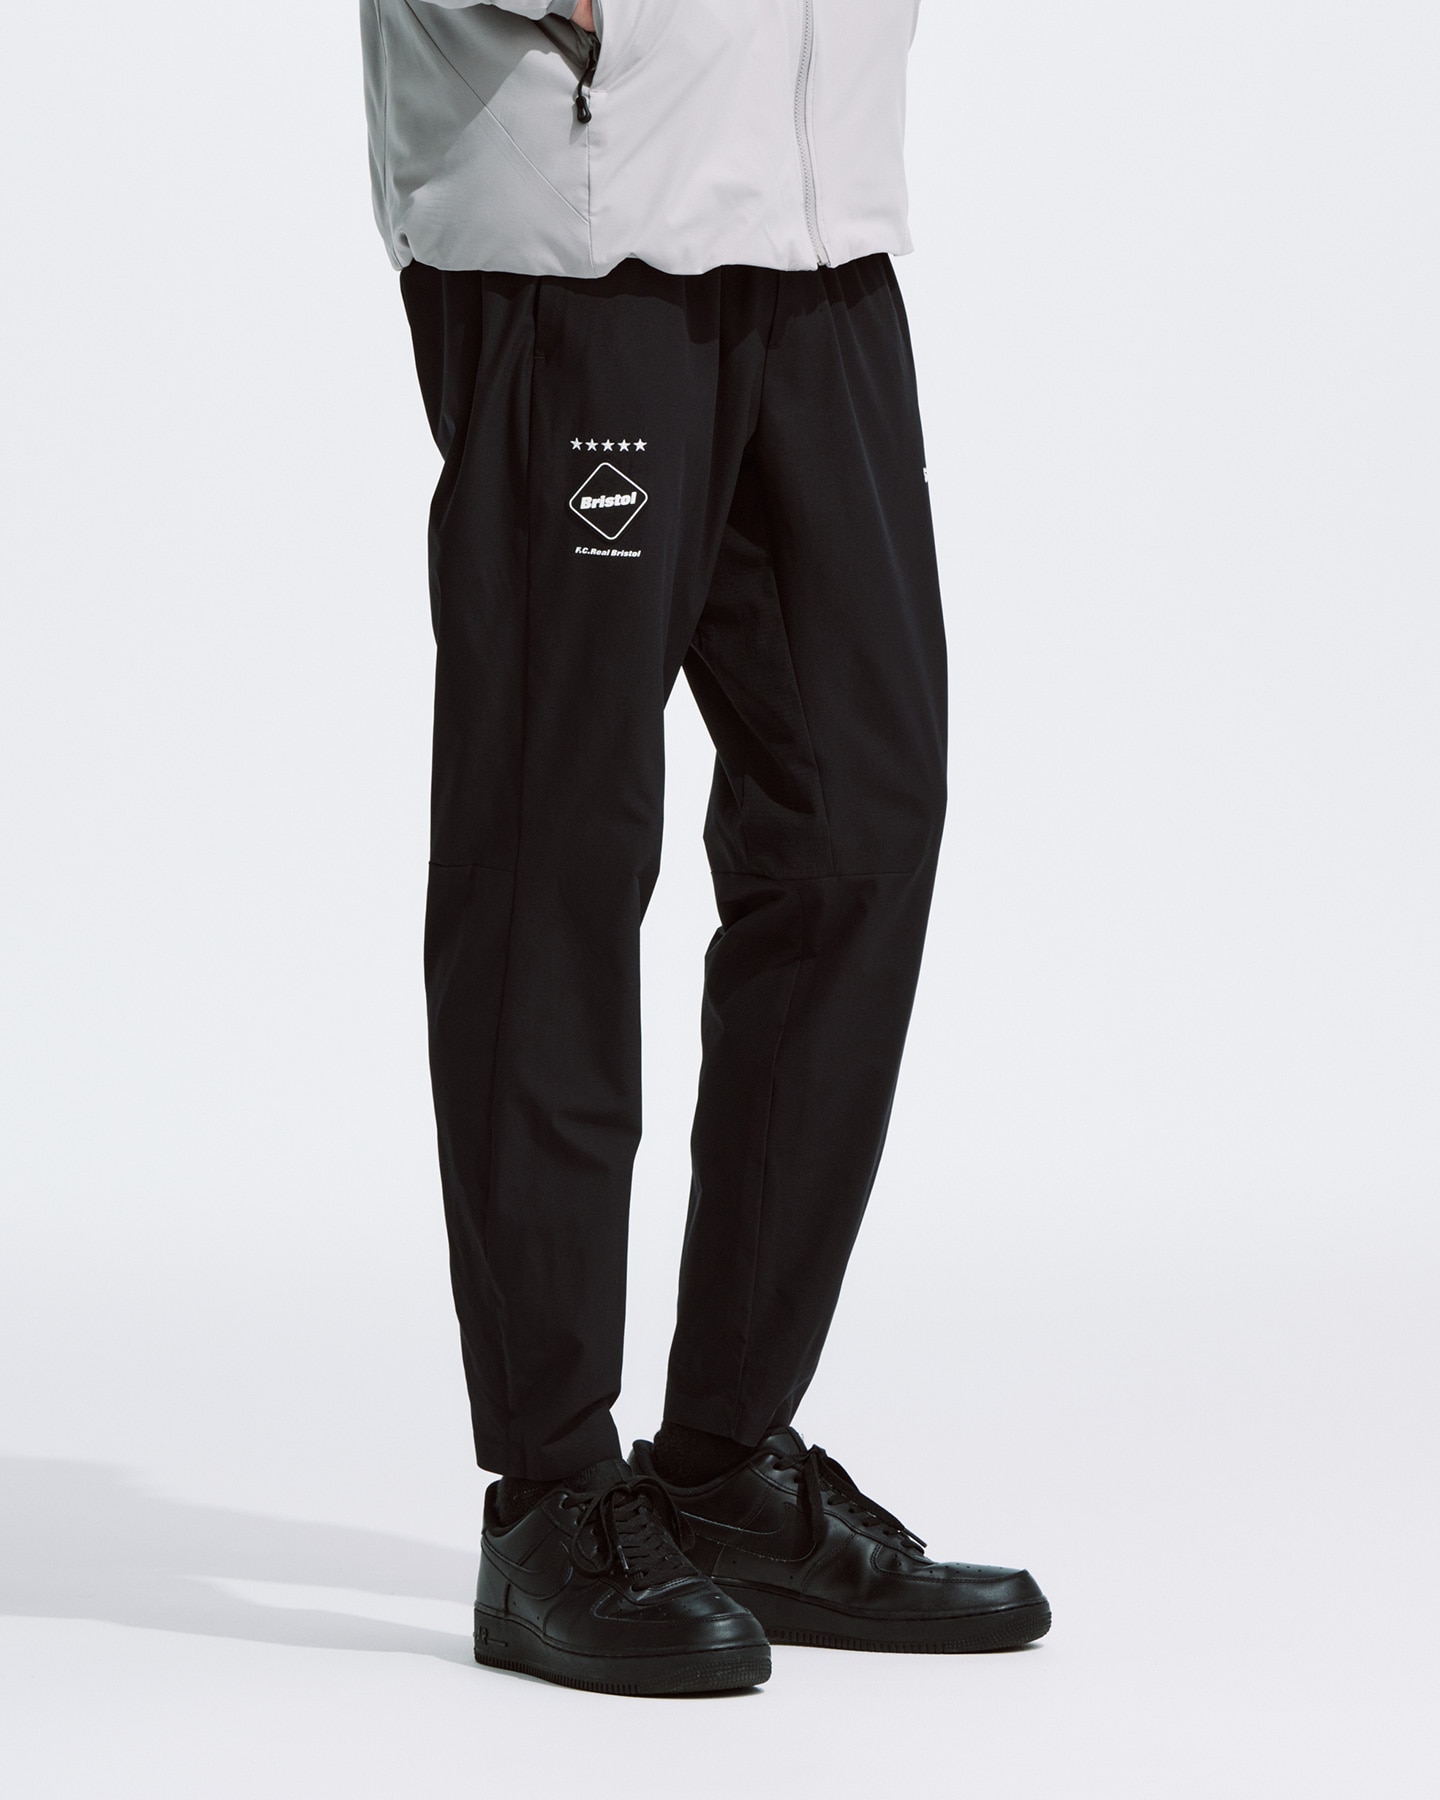 SOPH. | STRETCH LIGHT WEIGHT TAPERED EASY PANTS(S GRAY):